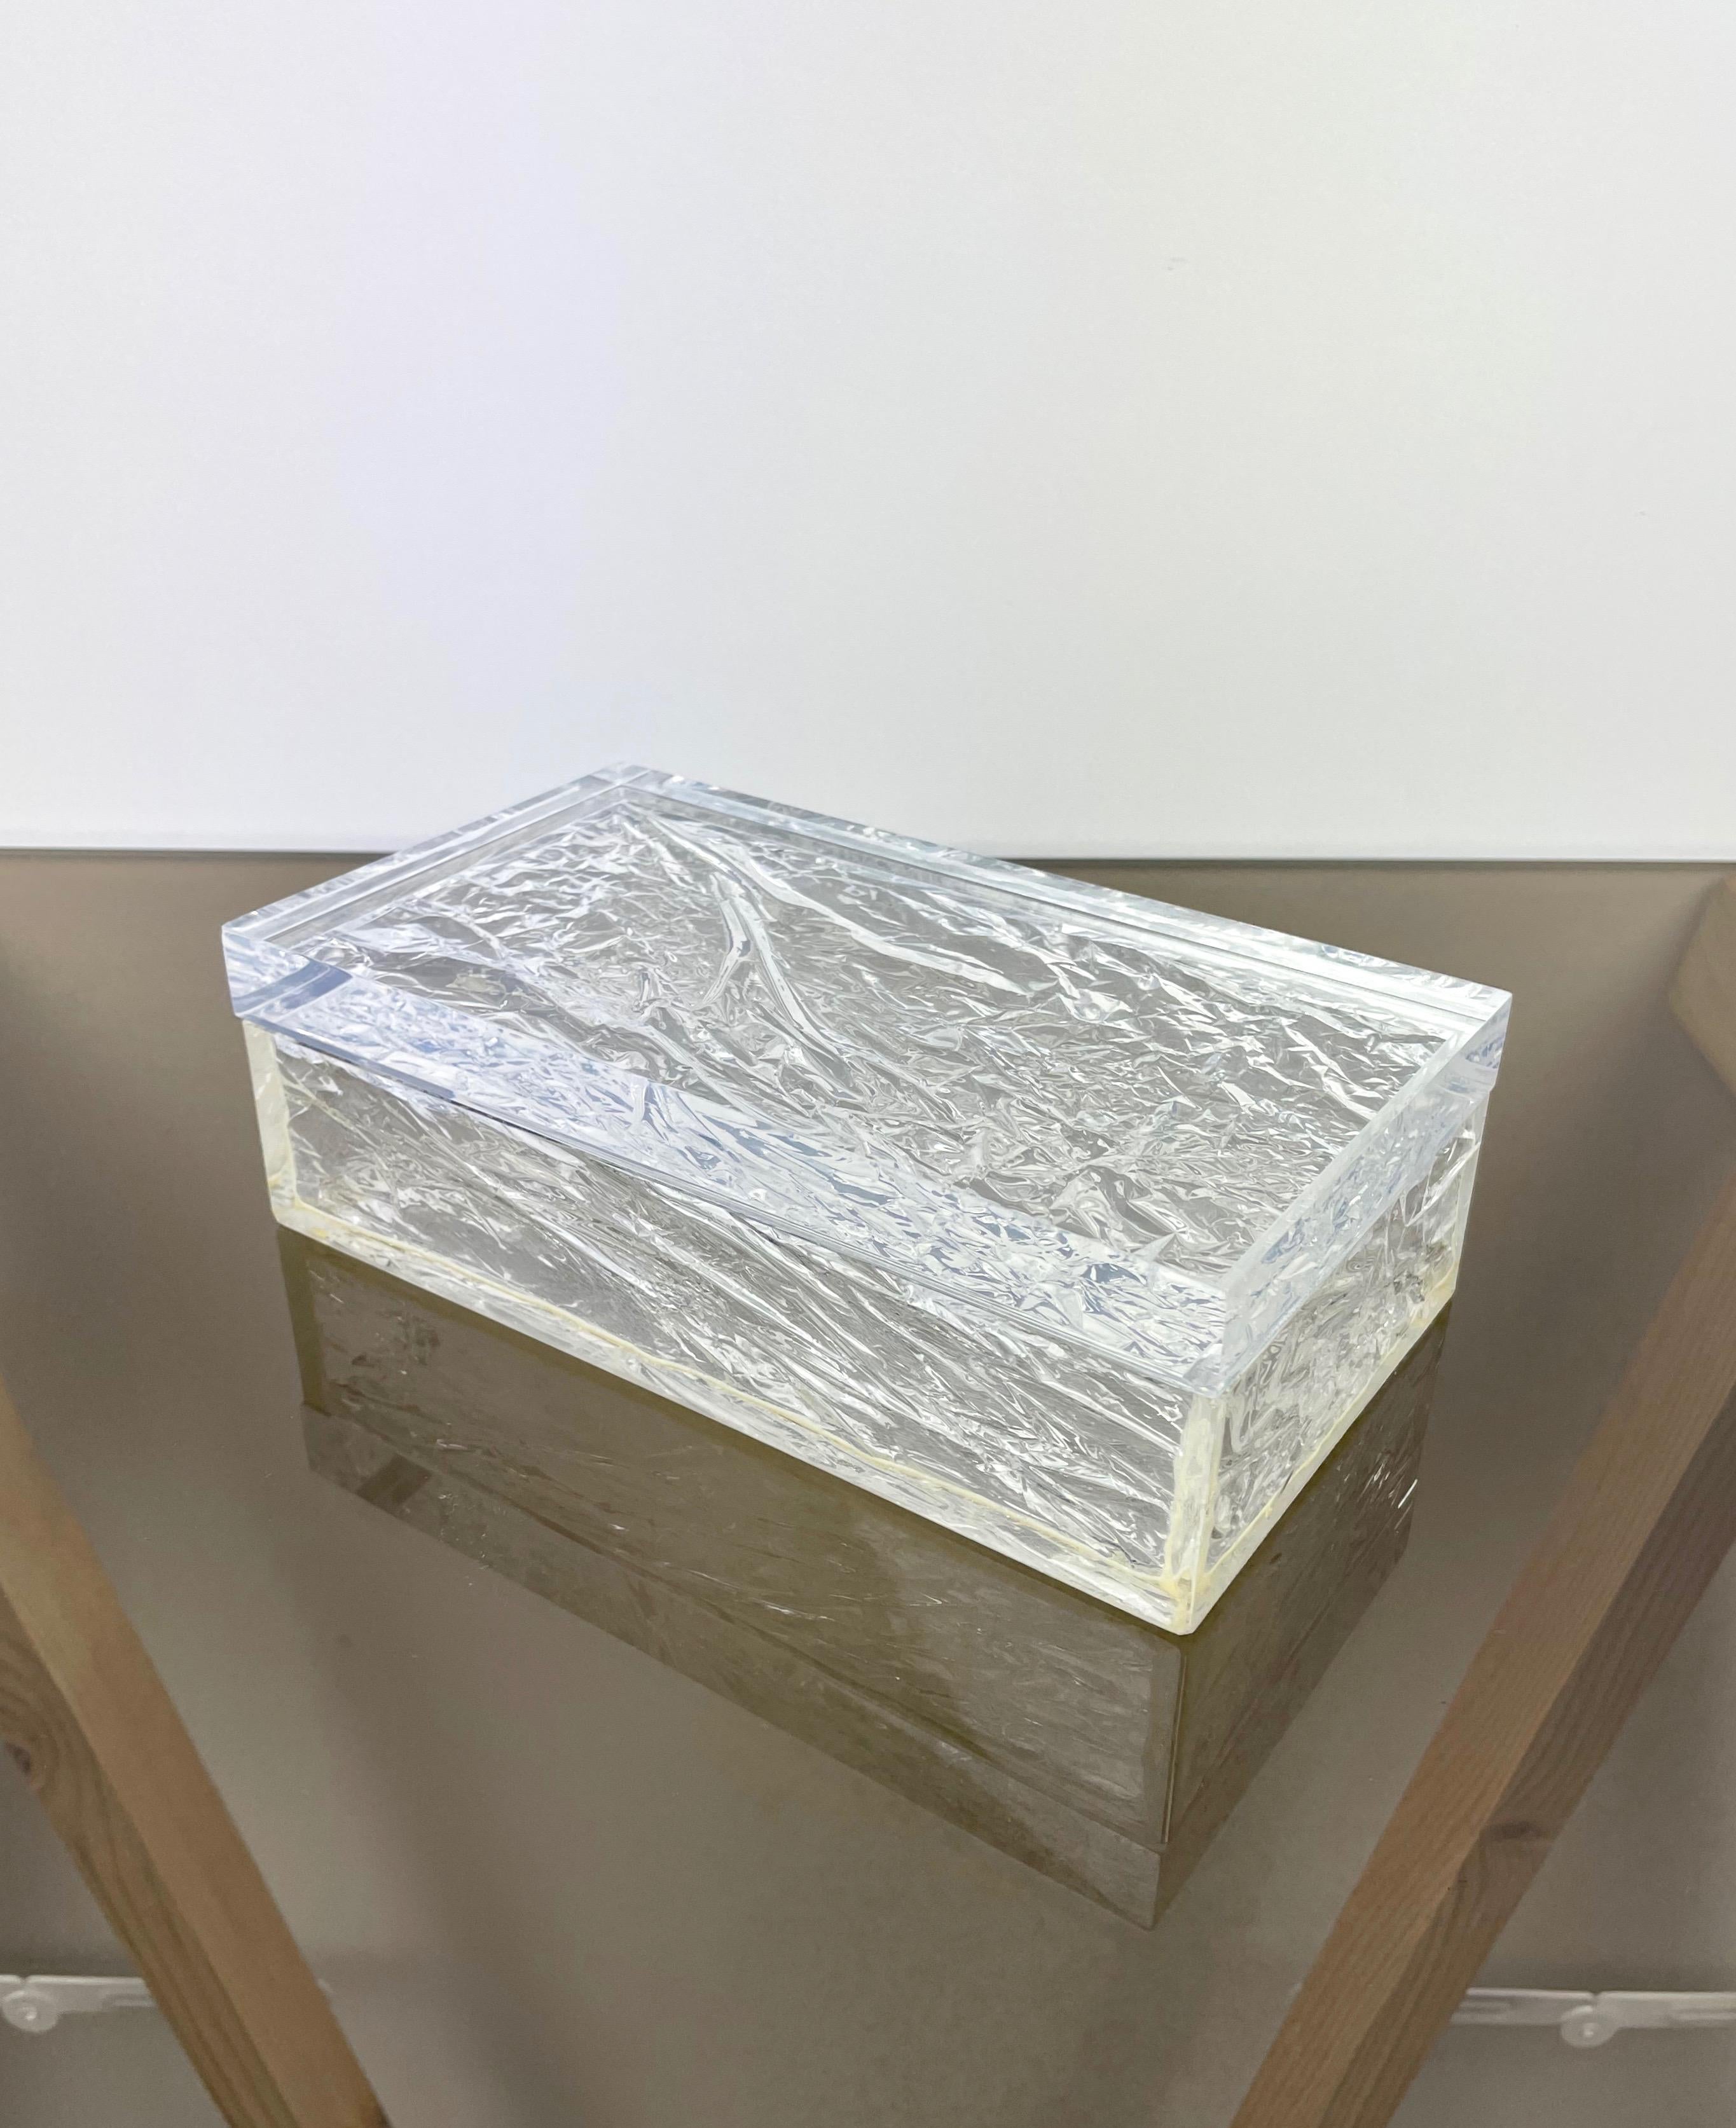 Rectangular box made of ice-effect Lucite in the style of the Italian designer Willy Rizzo, 1970s.